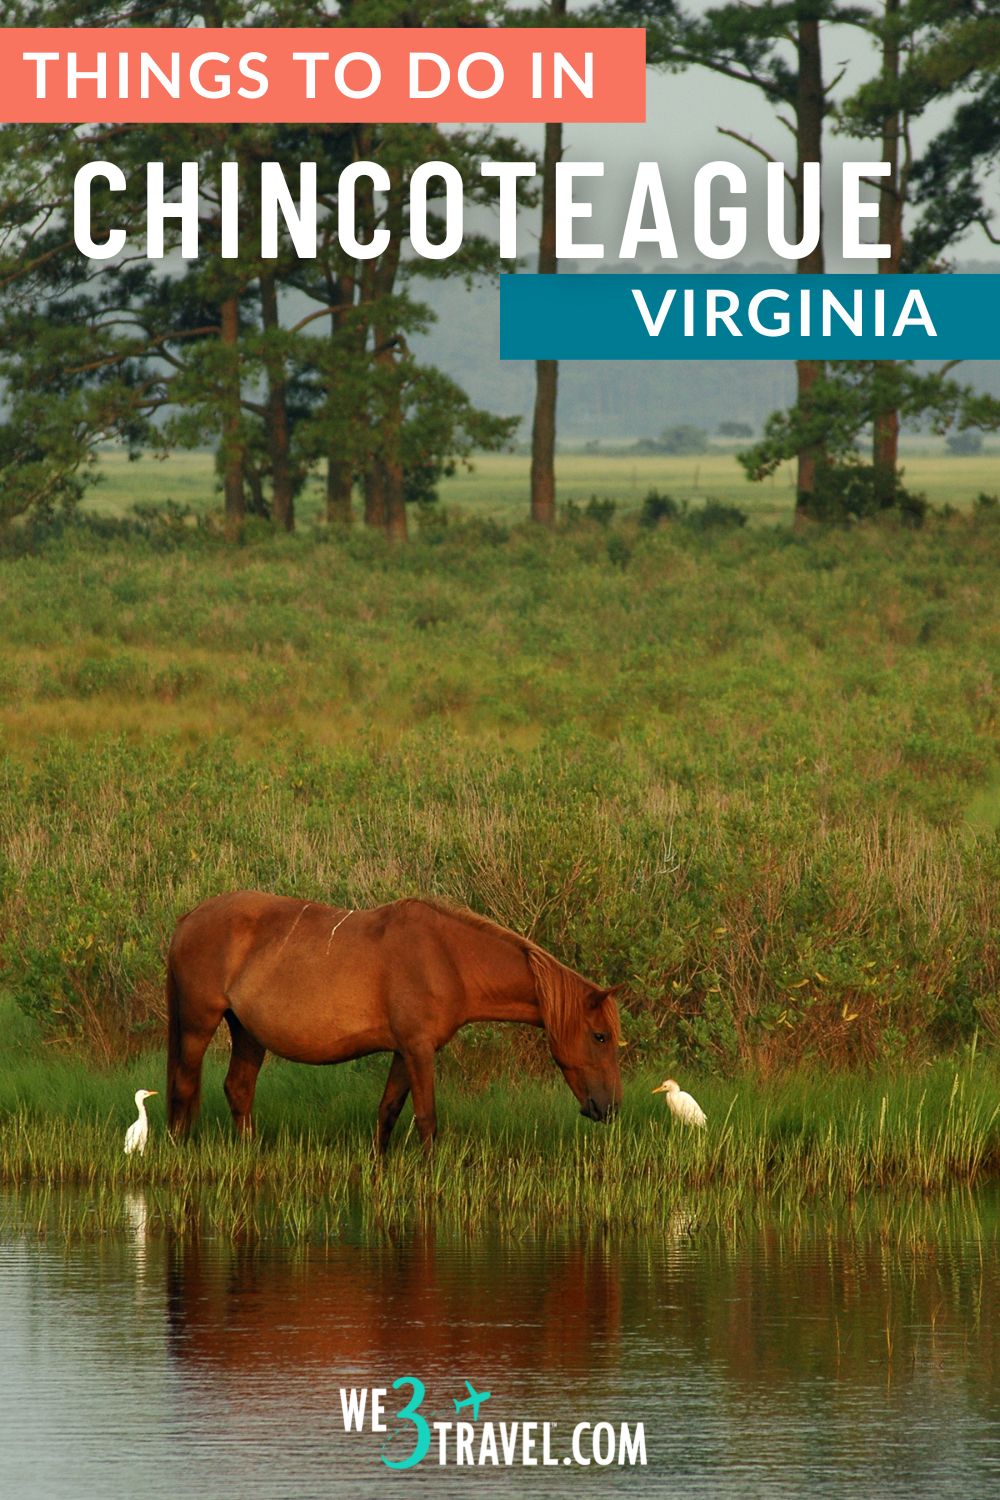 Things to do in Chincoteague VA